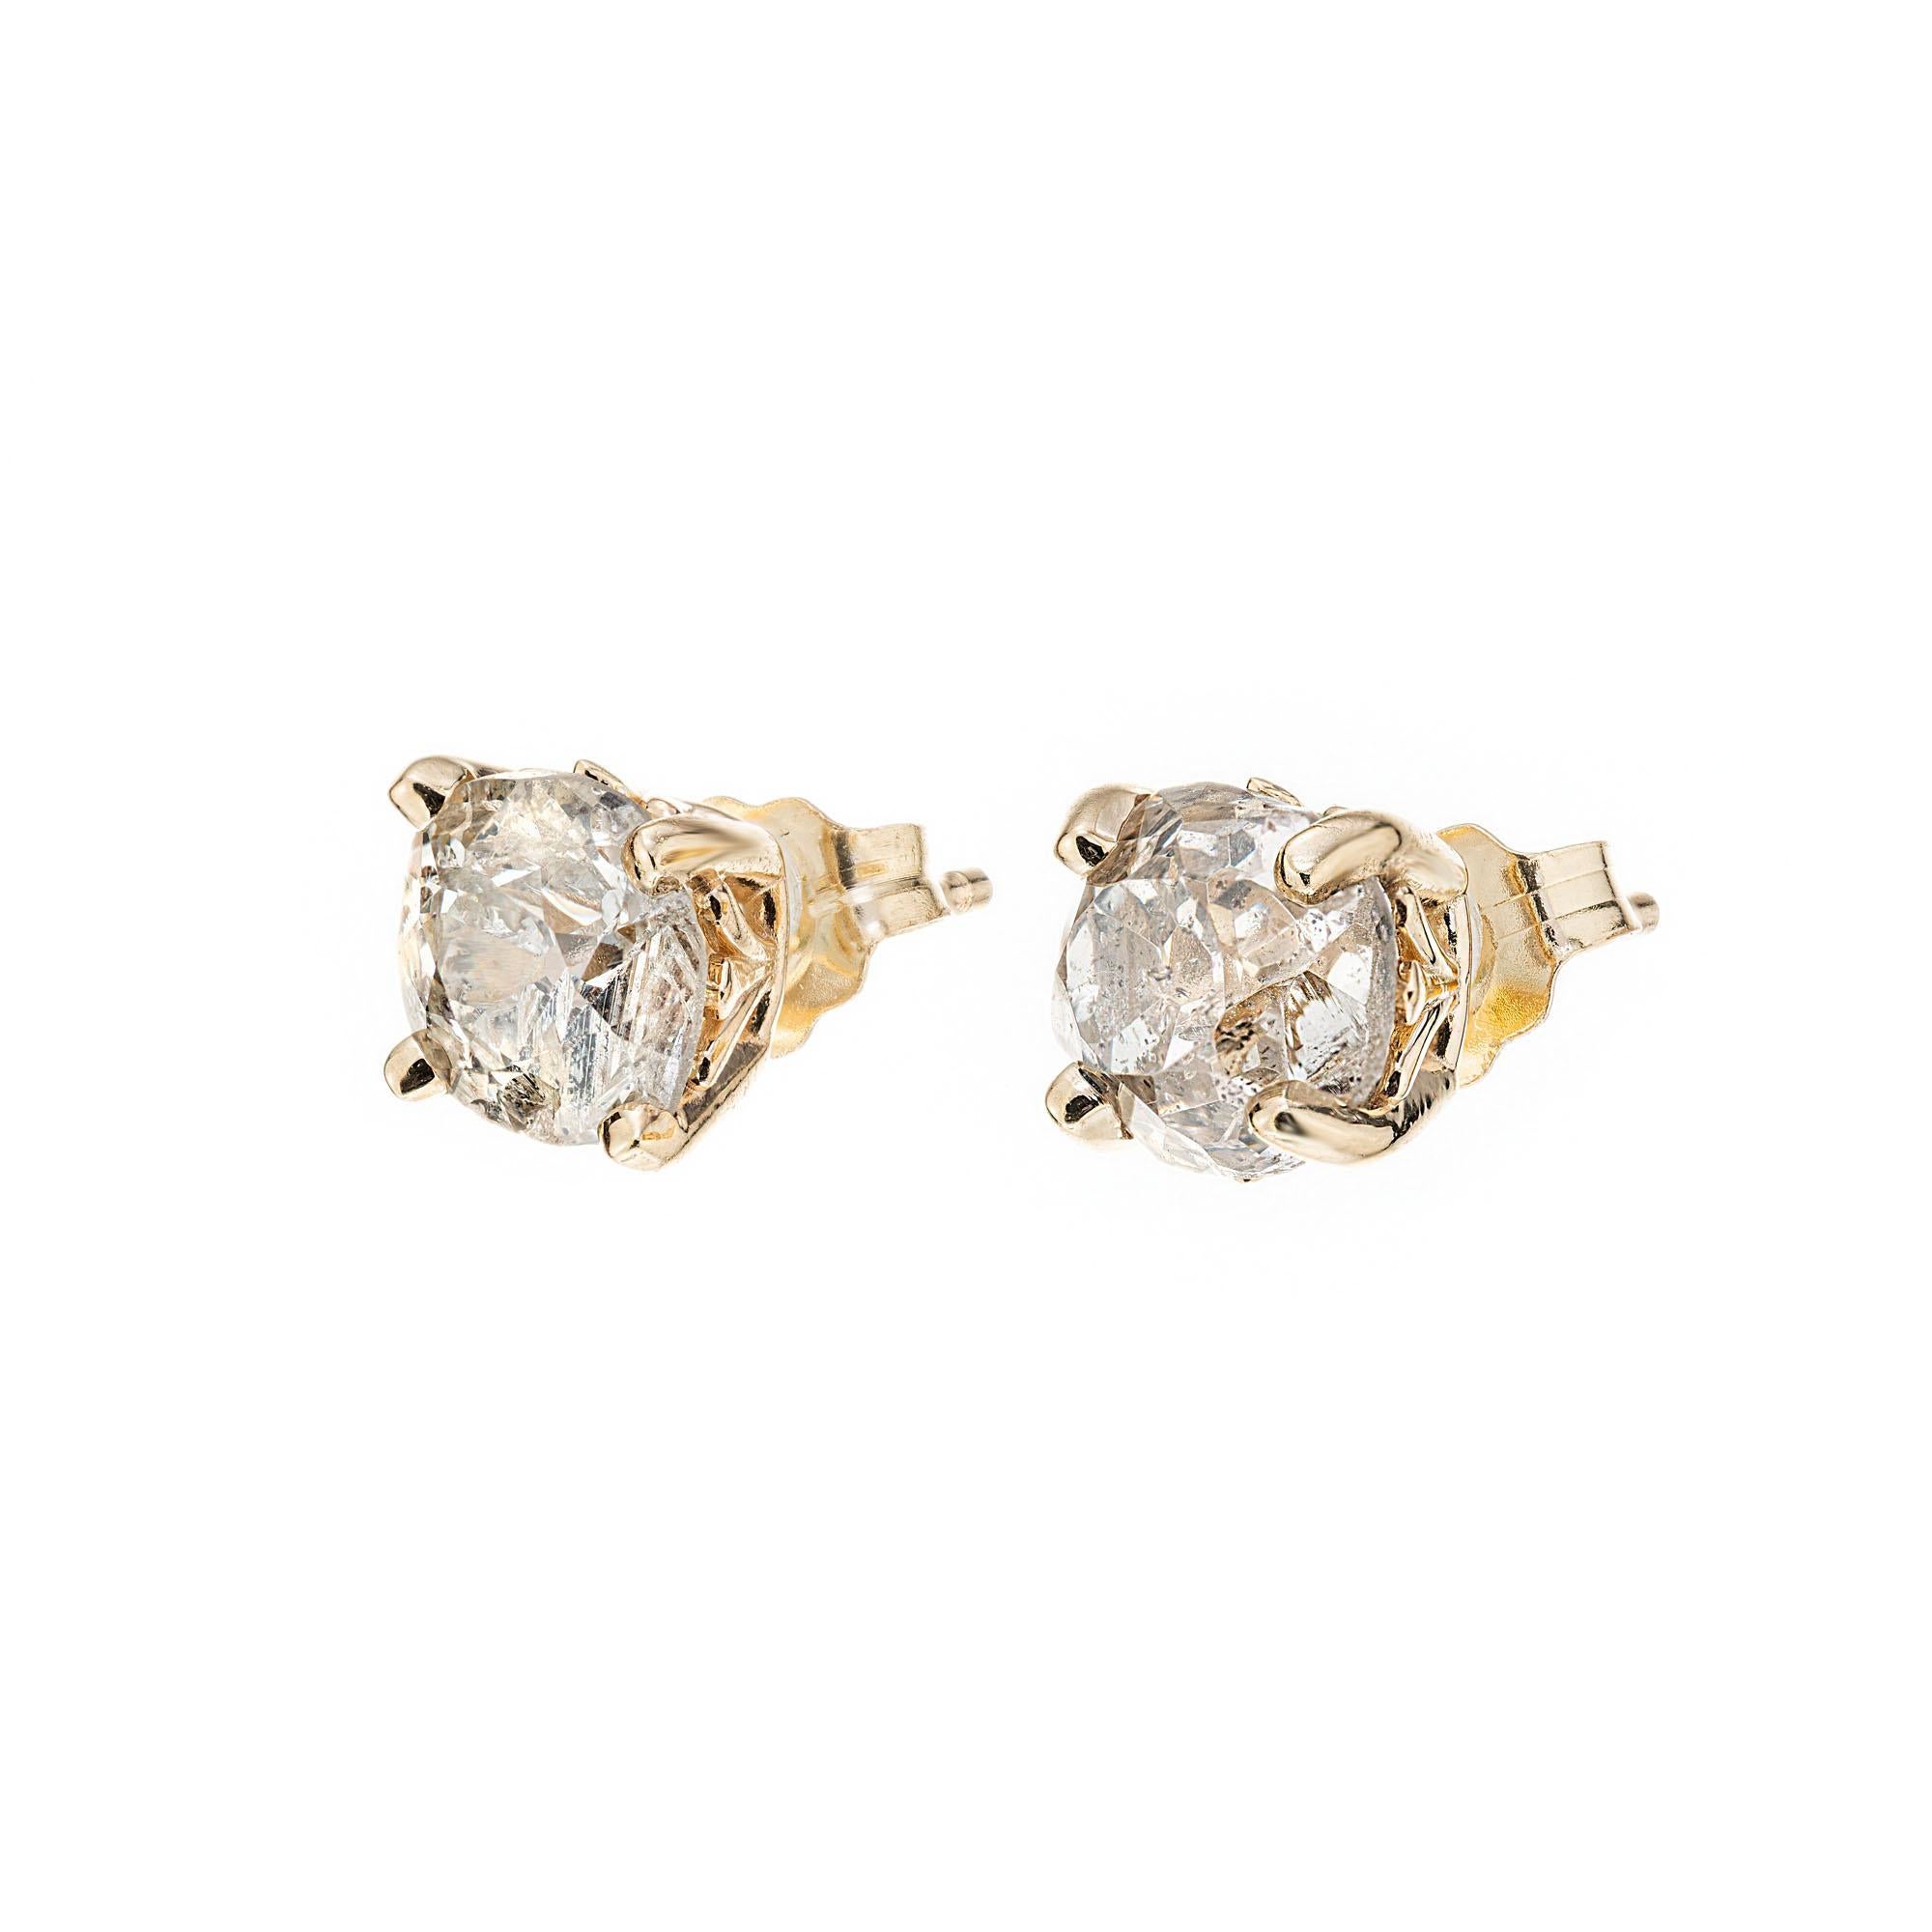 1820's Old mine cut diamond stud earrings. Faint yellow color L-M and eye visible flaws. Diamonds are from the 1820's with antique old world cutting style with raised crown and small table. The 14k yellow gold settings were recently created for the